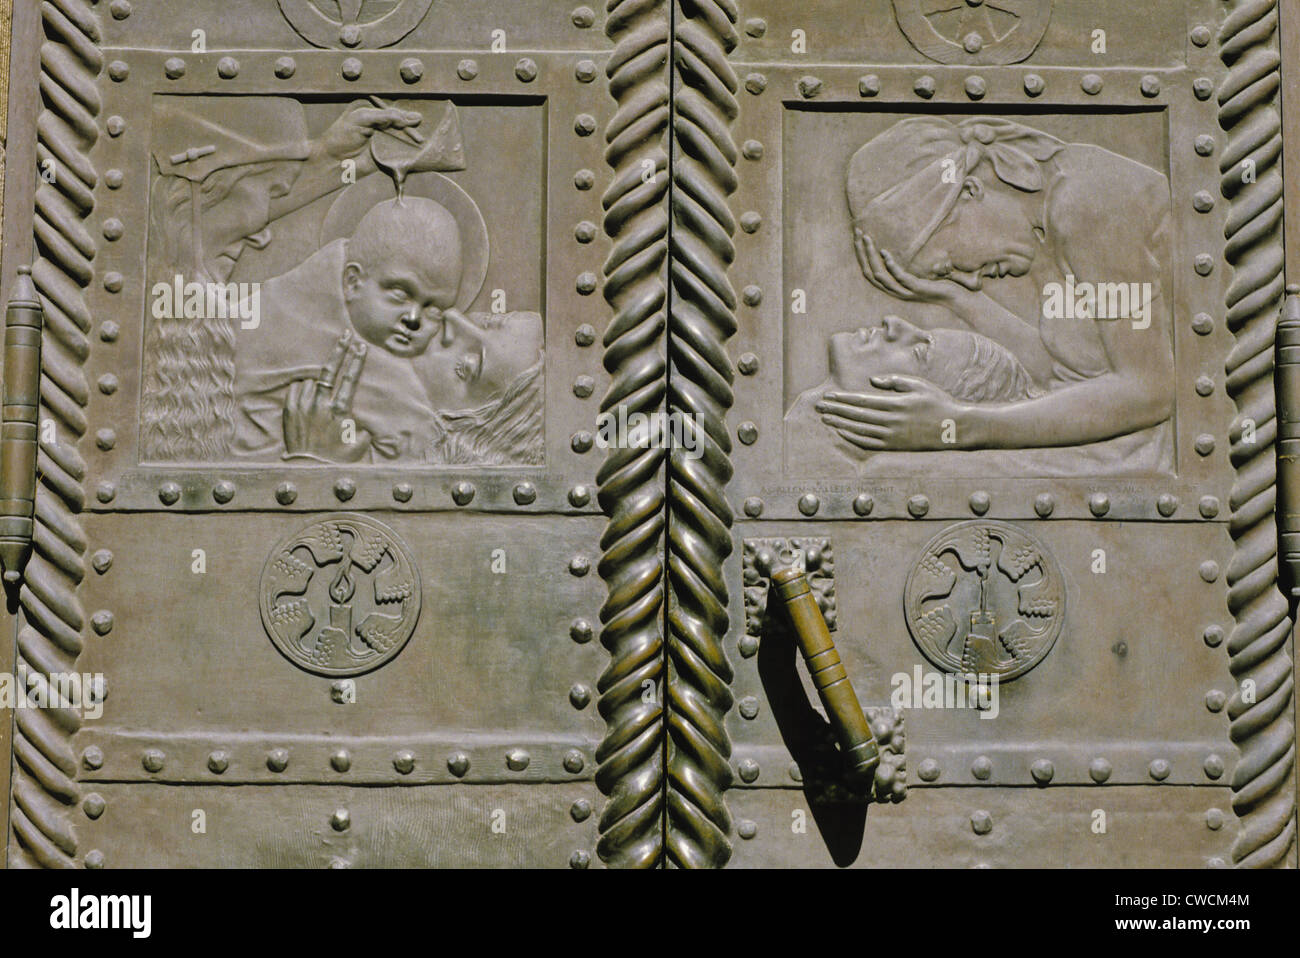 Metal doors with relief sculpture on the 1903 Juselius Mausoleum located in Pori, Finland Stock Photo